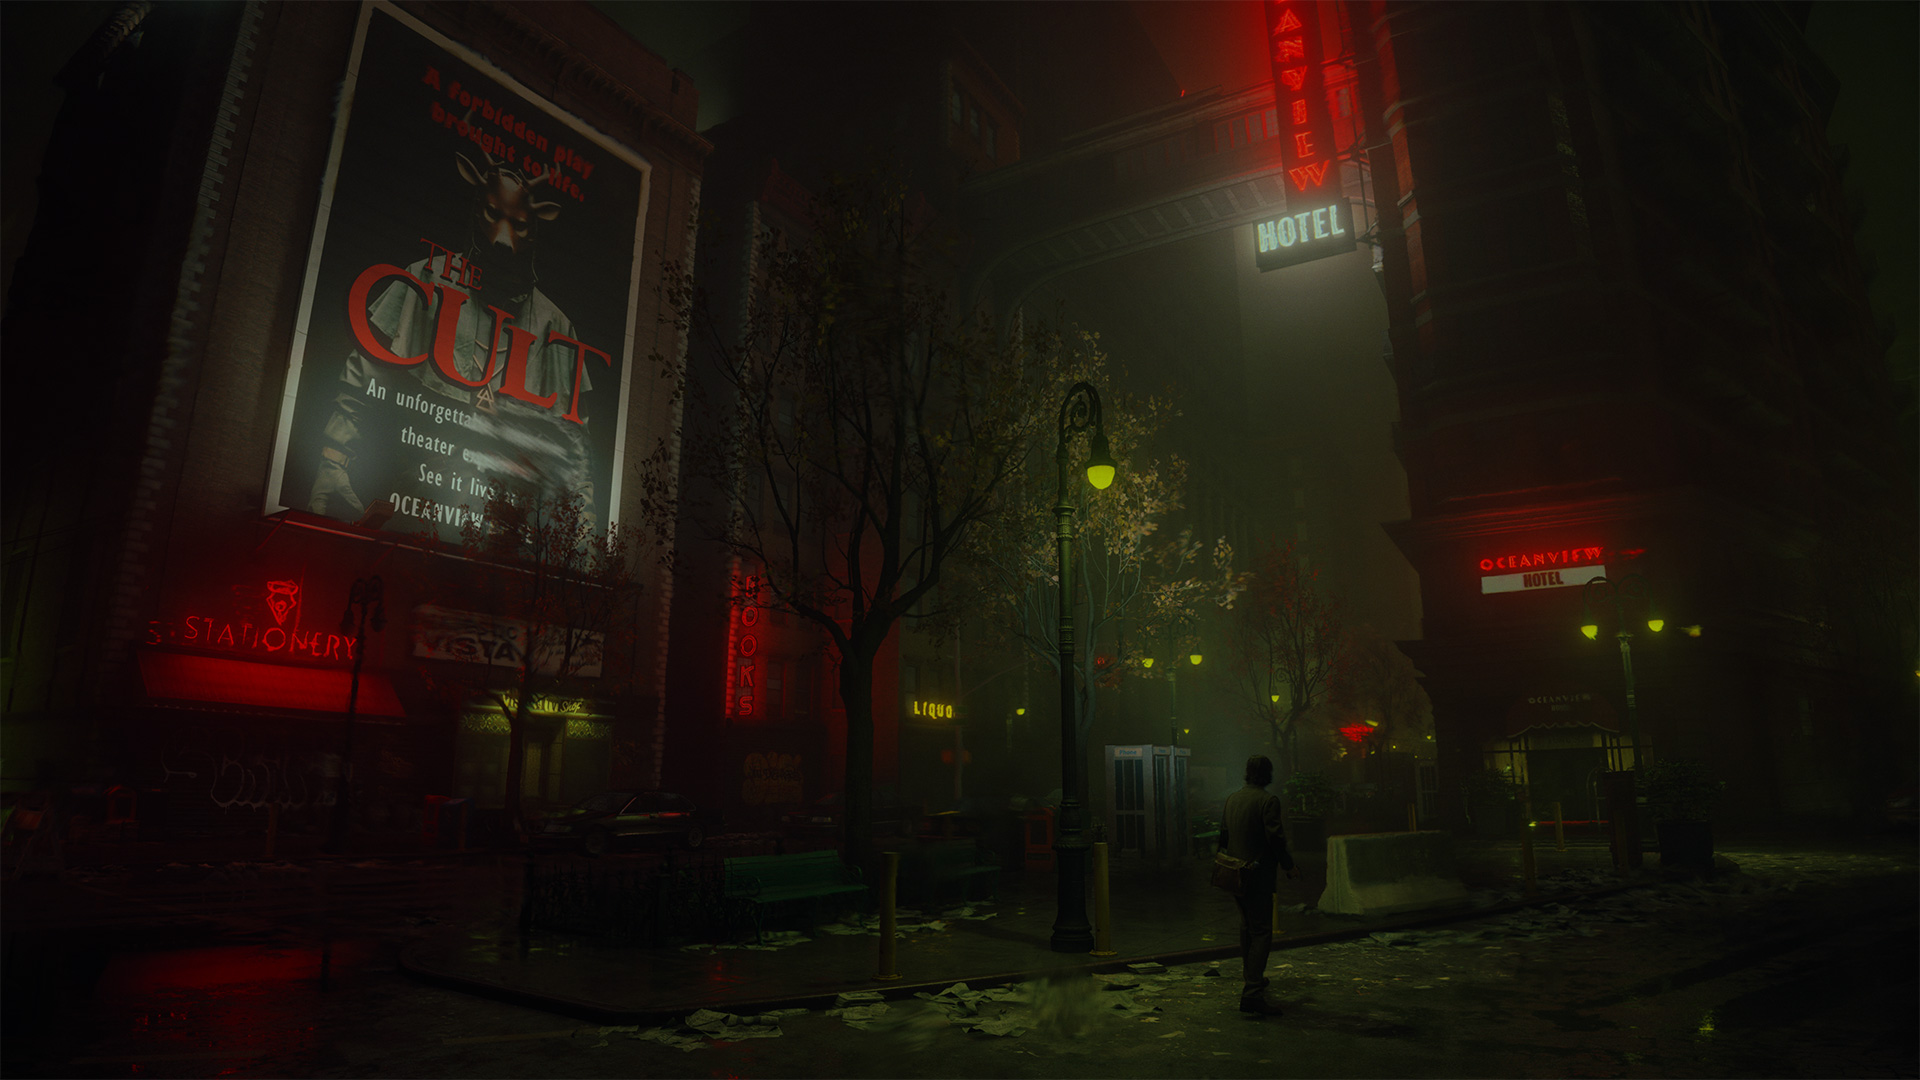 Alan Wake 2 HD desktop wallpaper featuring a suspenseful, foggy street scene with neon signs and a mysterious figure.